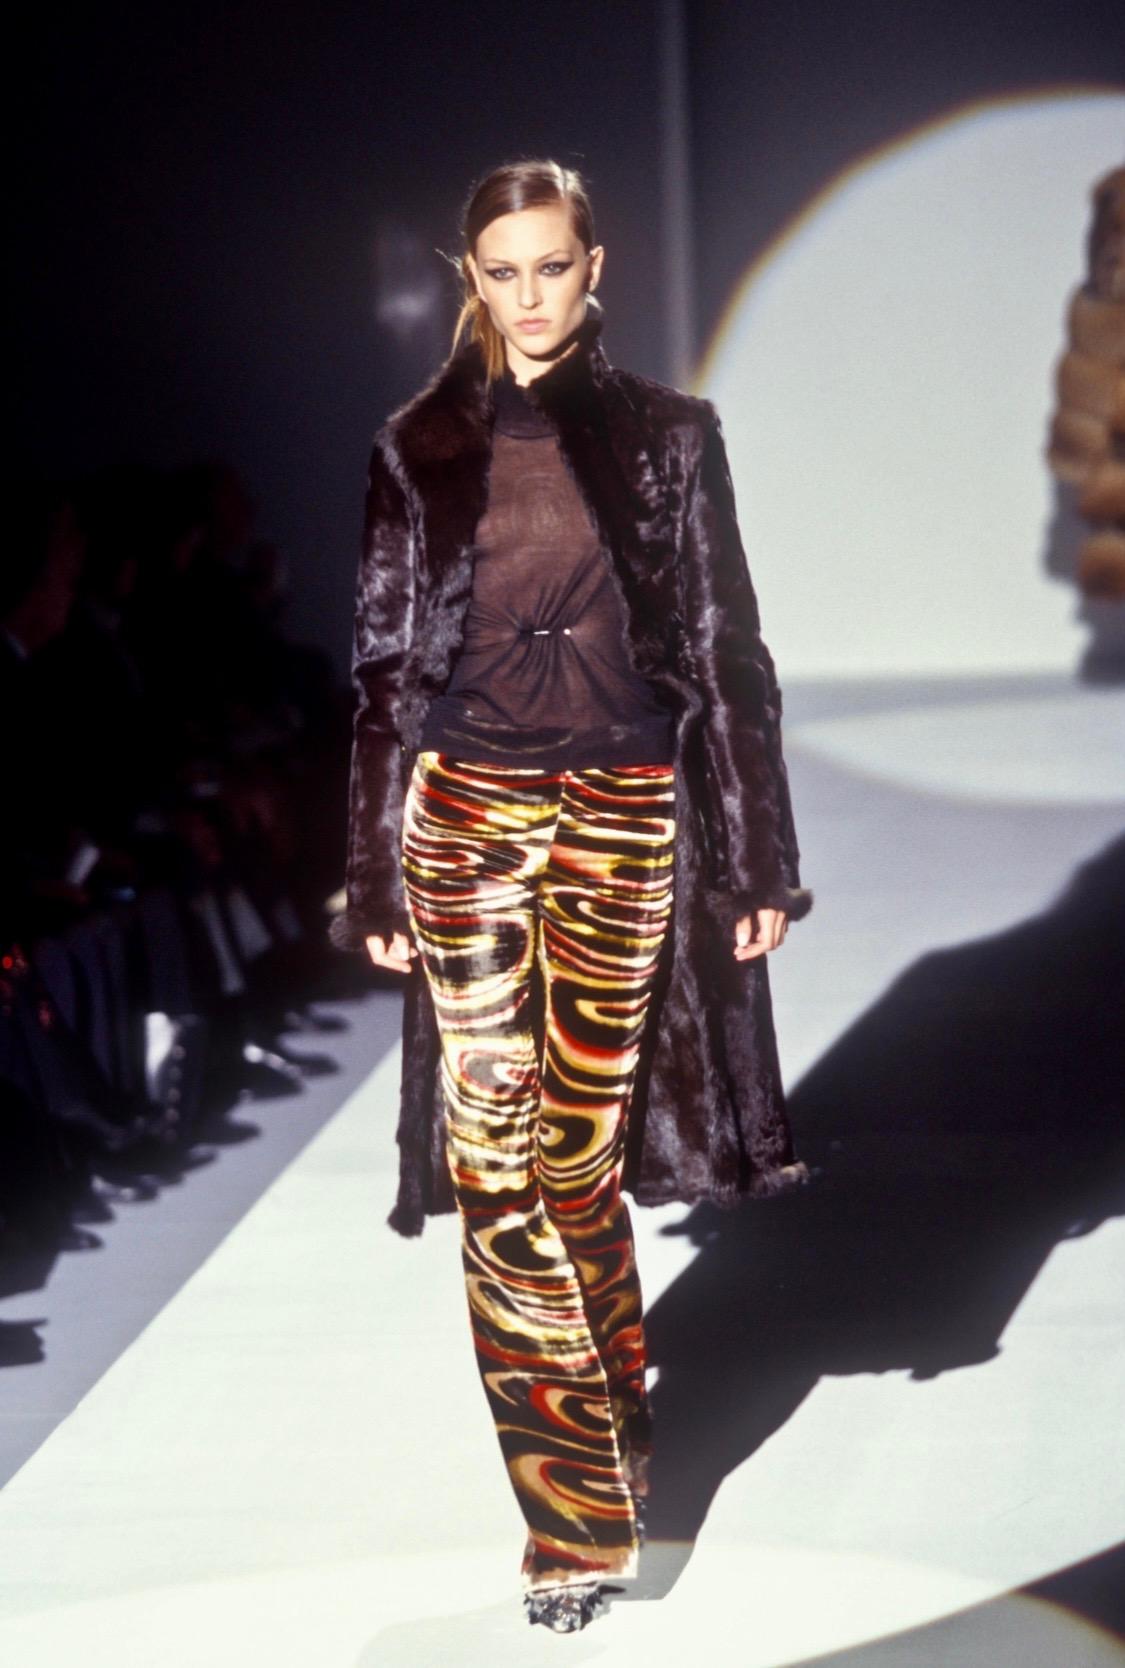 Presenting a sheer maroon short sleeve top designed by Tom Ford for Gucci's Fall/Winter 1999 collection. The front of the blouse is cinched and adorned with a silver-toned pin with G logo engraving. The black version of this top debuted on the